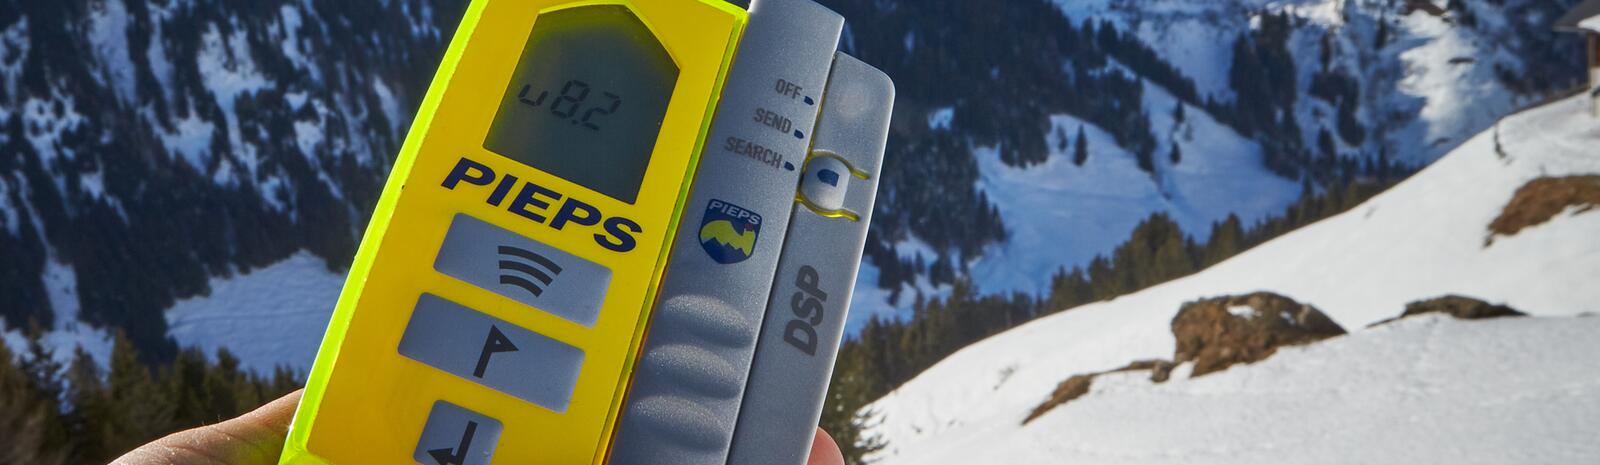 avalanche transceiver - a constant companion in backcountry | © Daniel Roos Photographie